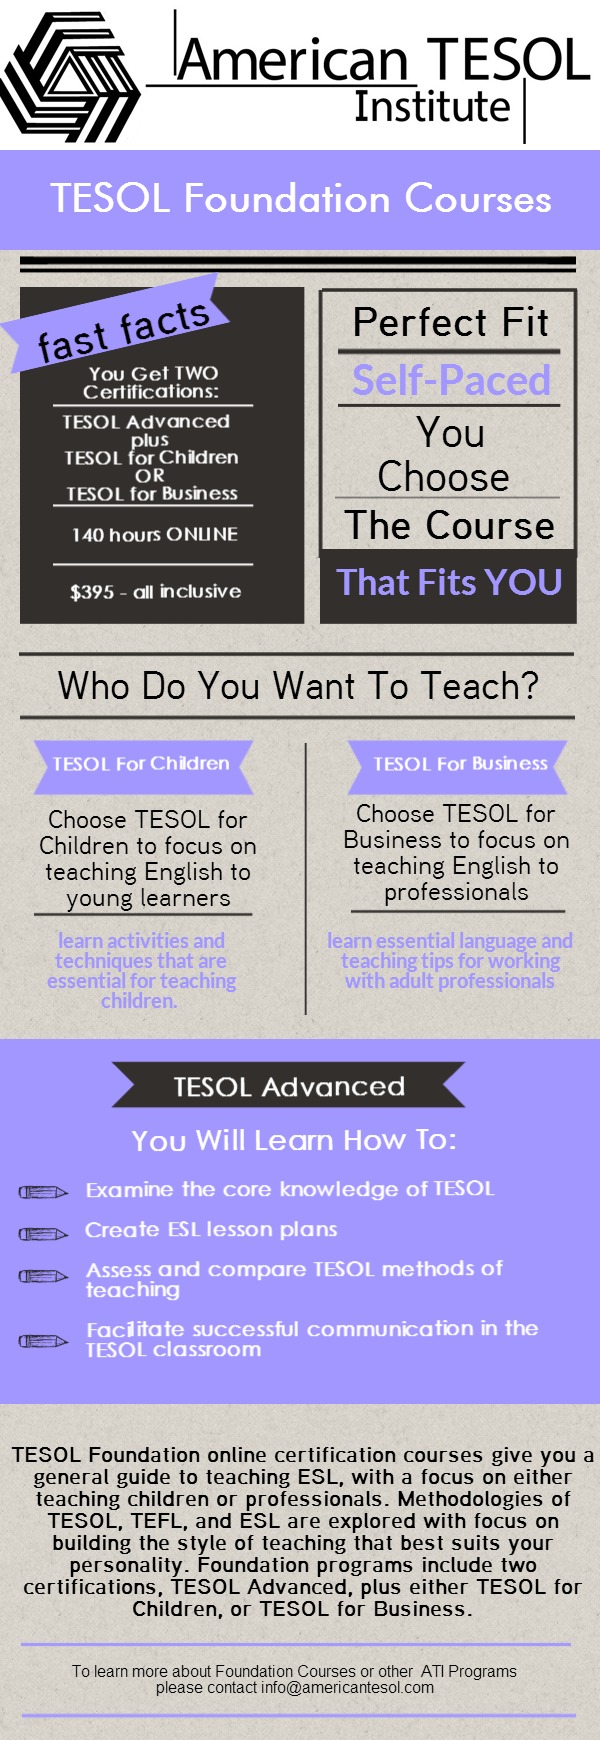 Become a TESOL Teacher - American TESOL Foundation Certifications